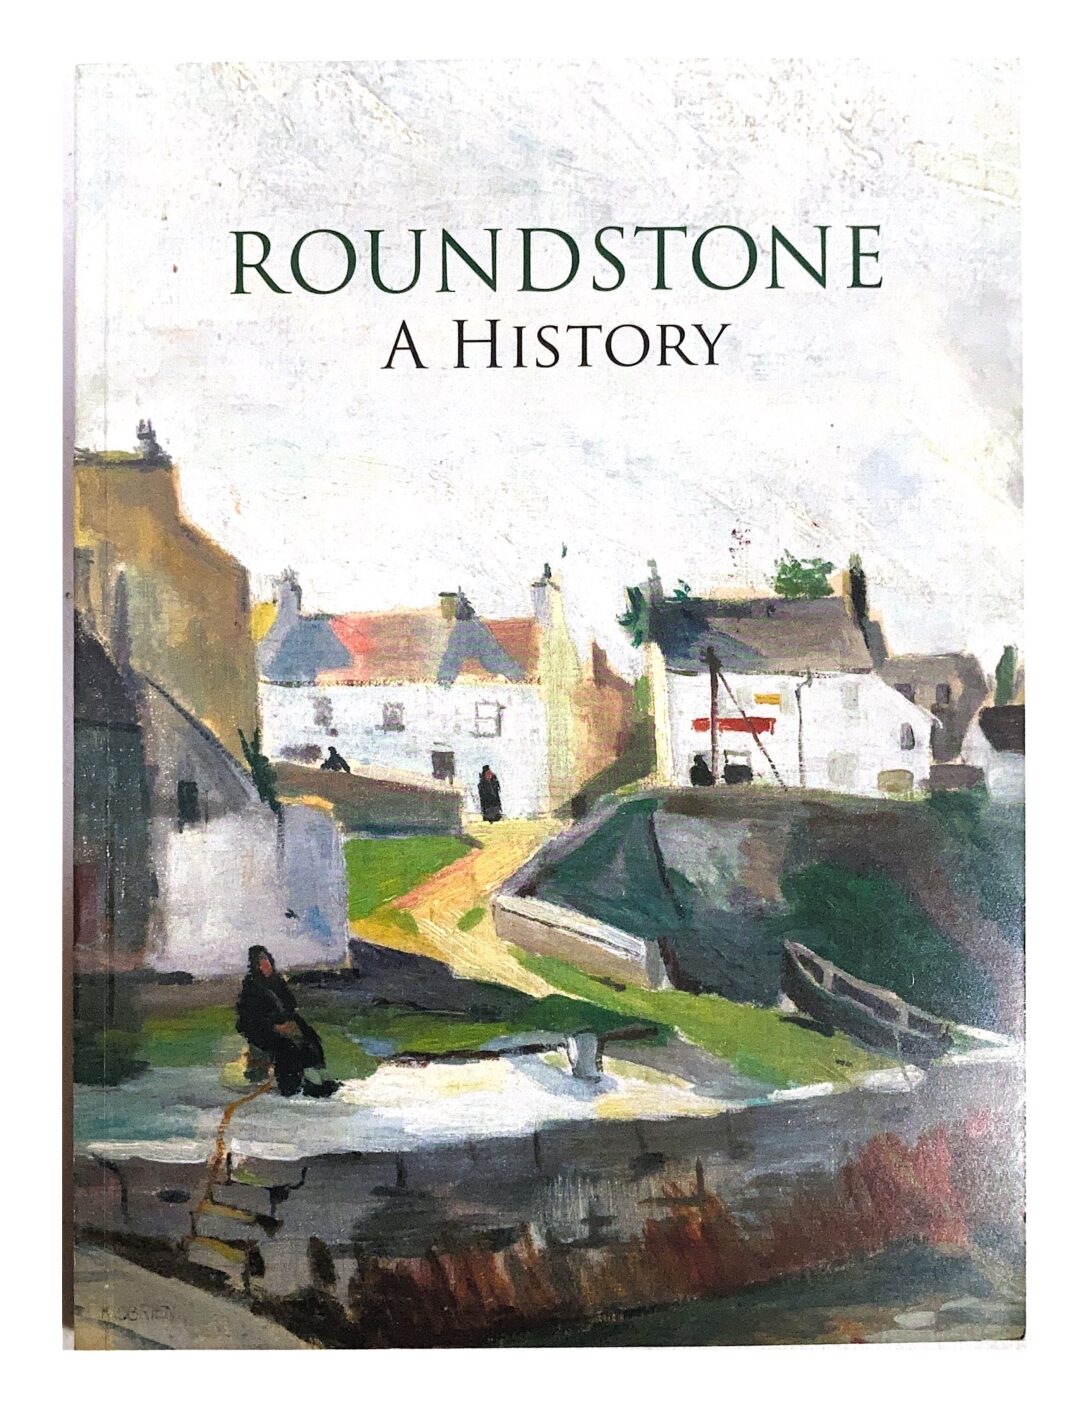 Roundstone: A History | Michael Halliday | Charlie Byrne's